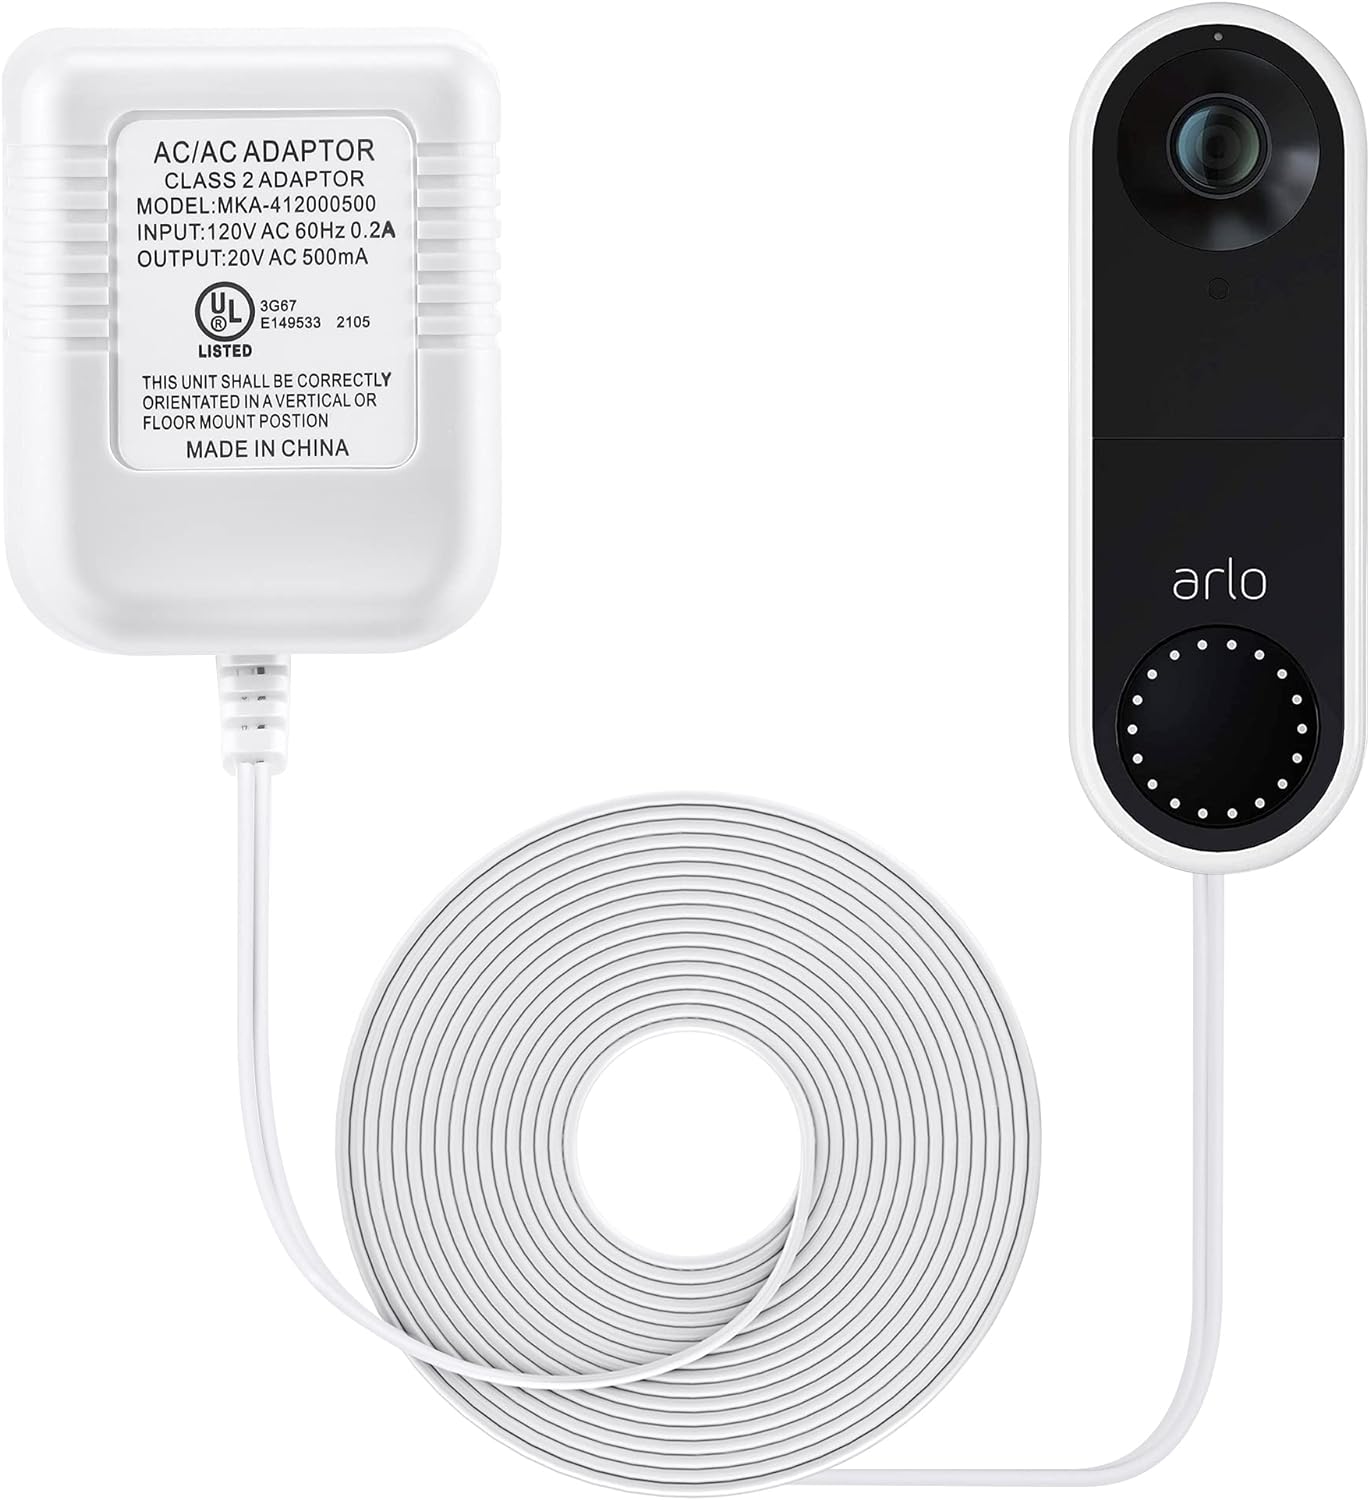 Dreyoo(MERRY KING ENTERPRISES  16-24Volt Transformer, C Wire Power Adapter Compatible with Arlo Video Doorbell, Certified 20VAC 500mA Transformer with 16.4 ft